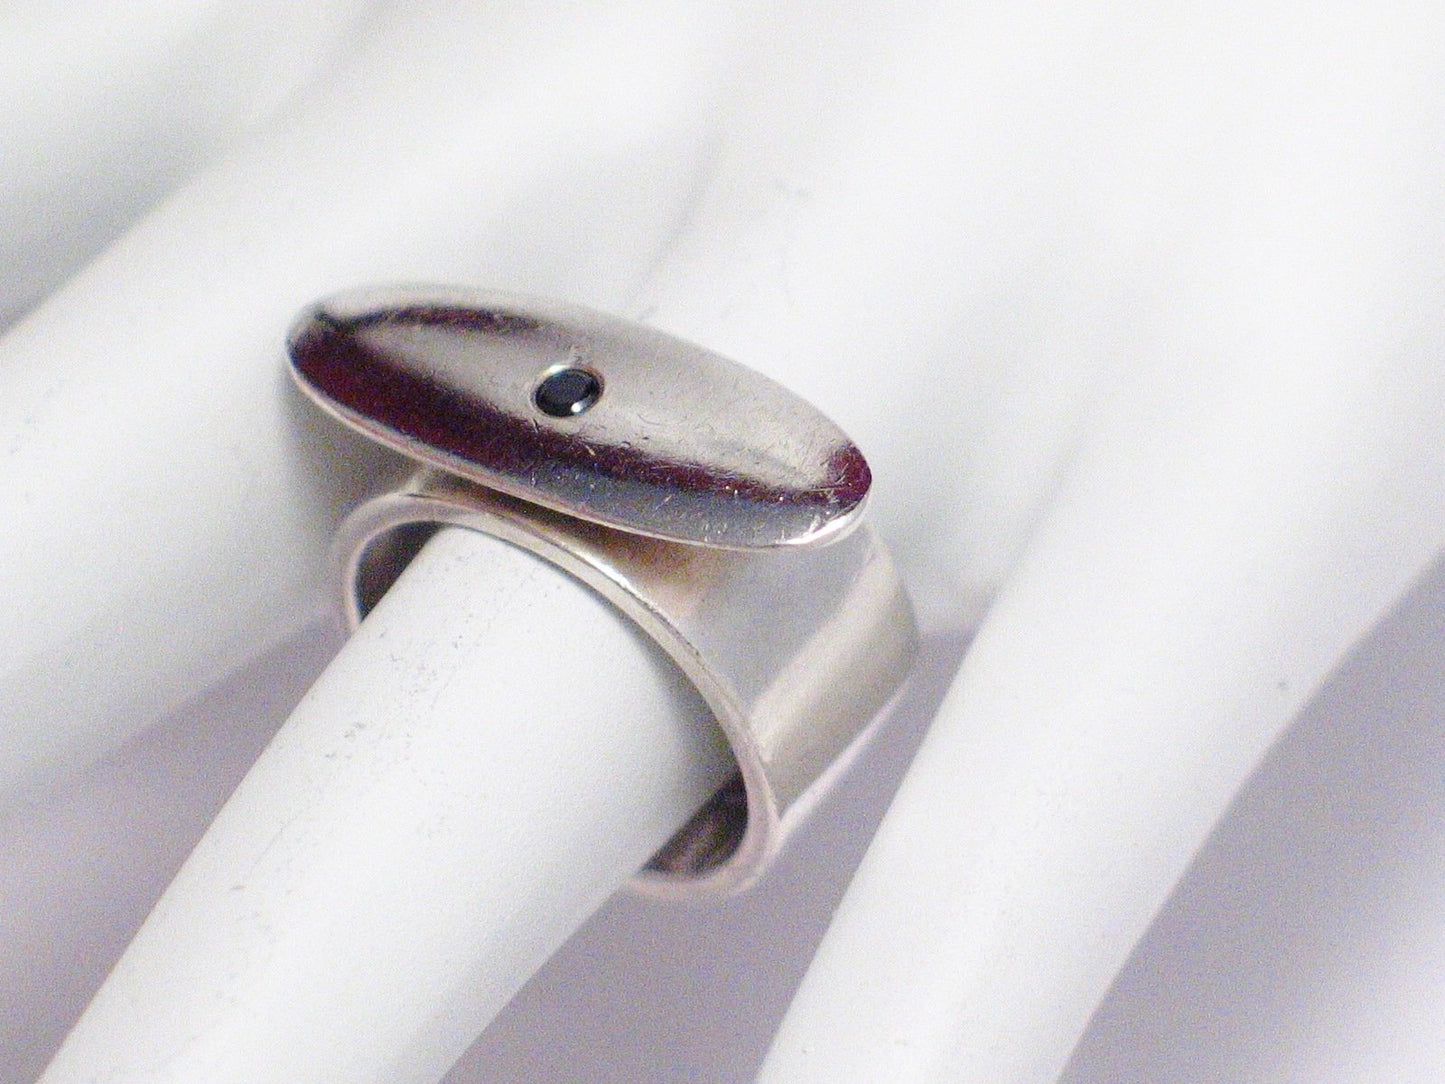 Unique Ring | The Balanced River Rock - Modern Art Design Oval Onyx Ring | Discount Estate Jewelry